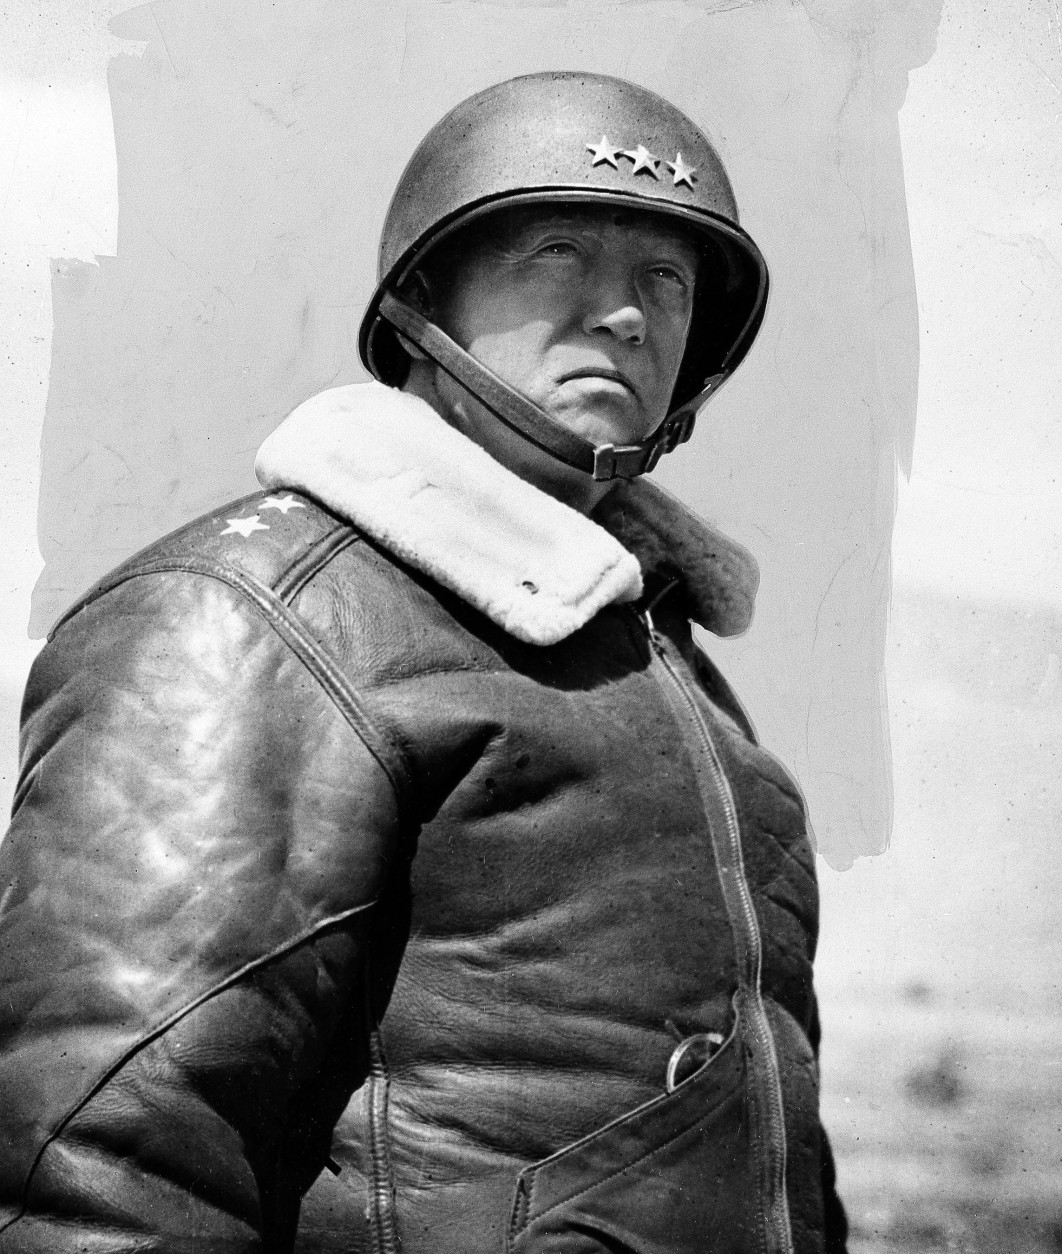 In this photo provided by the U.S. Army Signal Corps Maj. General George S. Patton is pictured, circa 1940s. (AP Photo/U.S. Army Signal Corps)